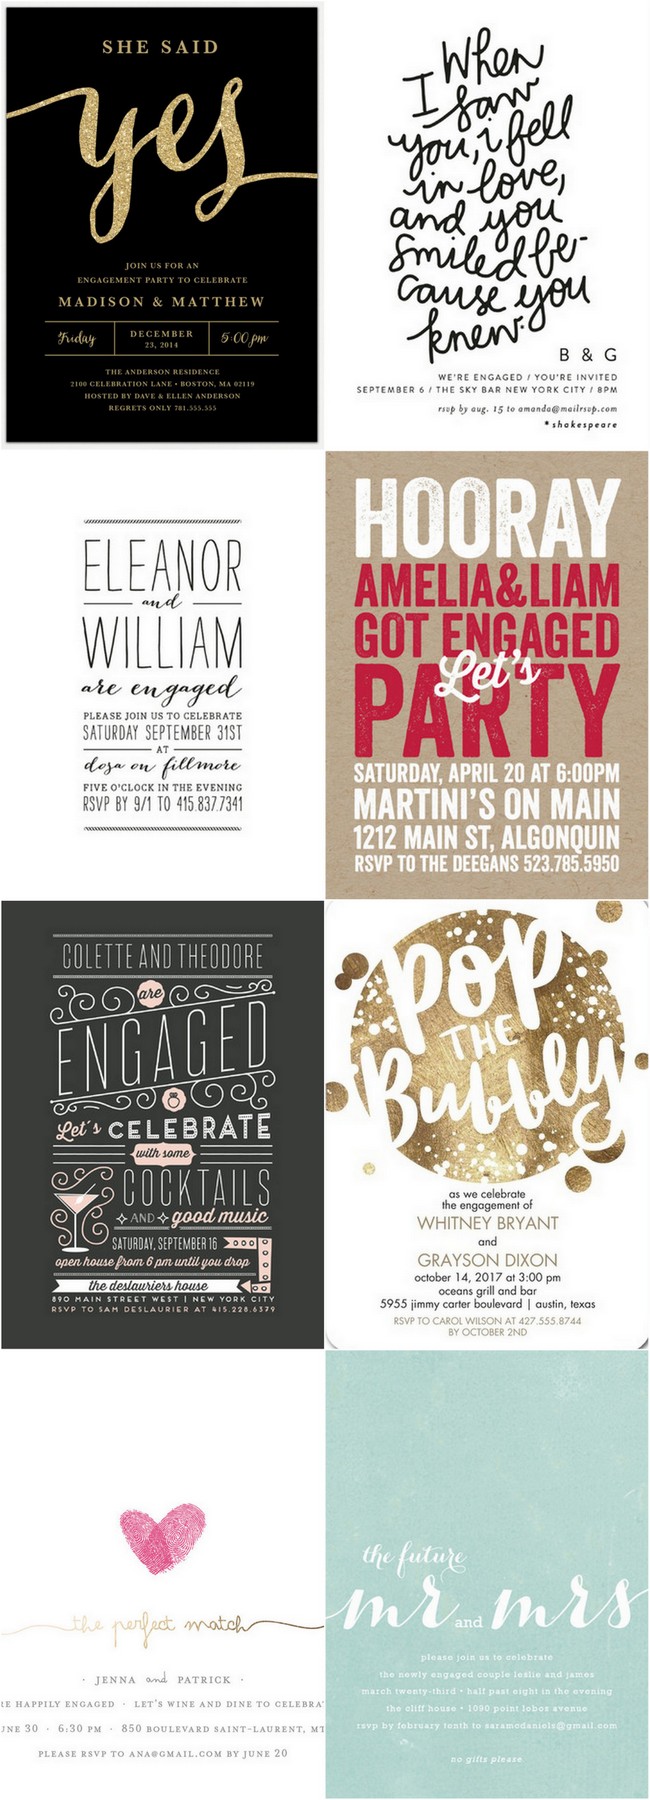 engagement party invitations 